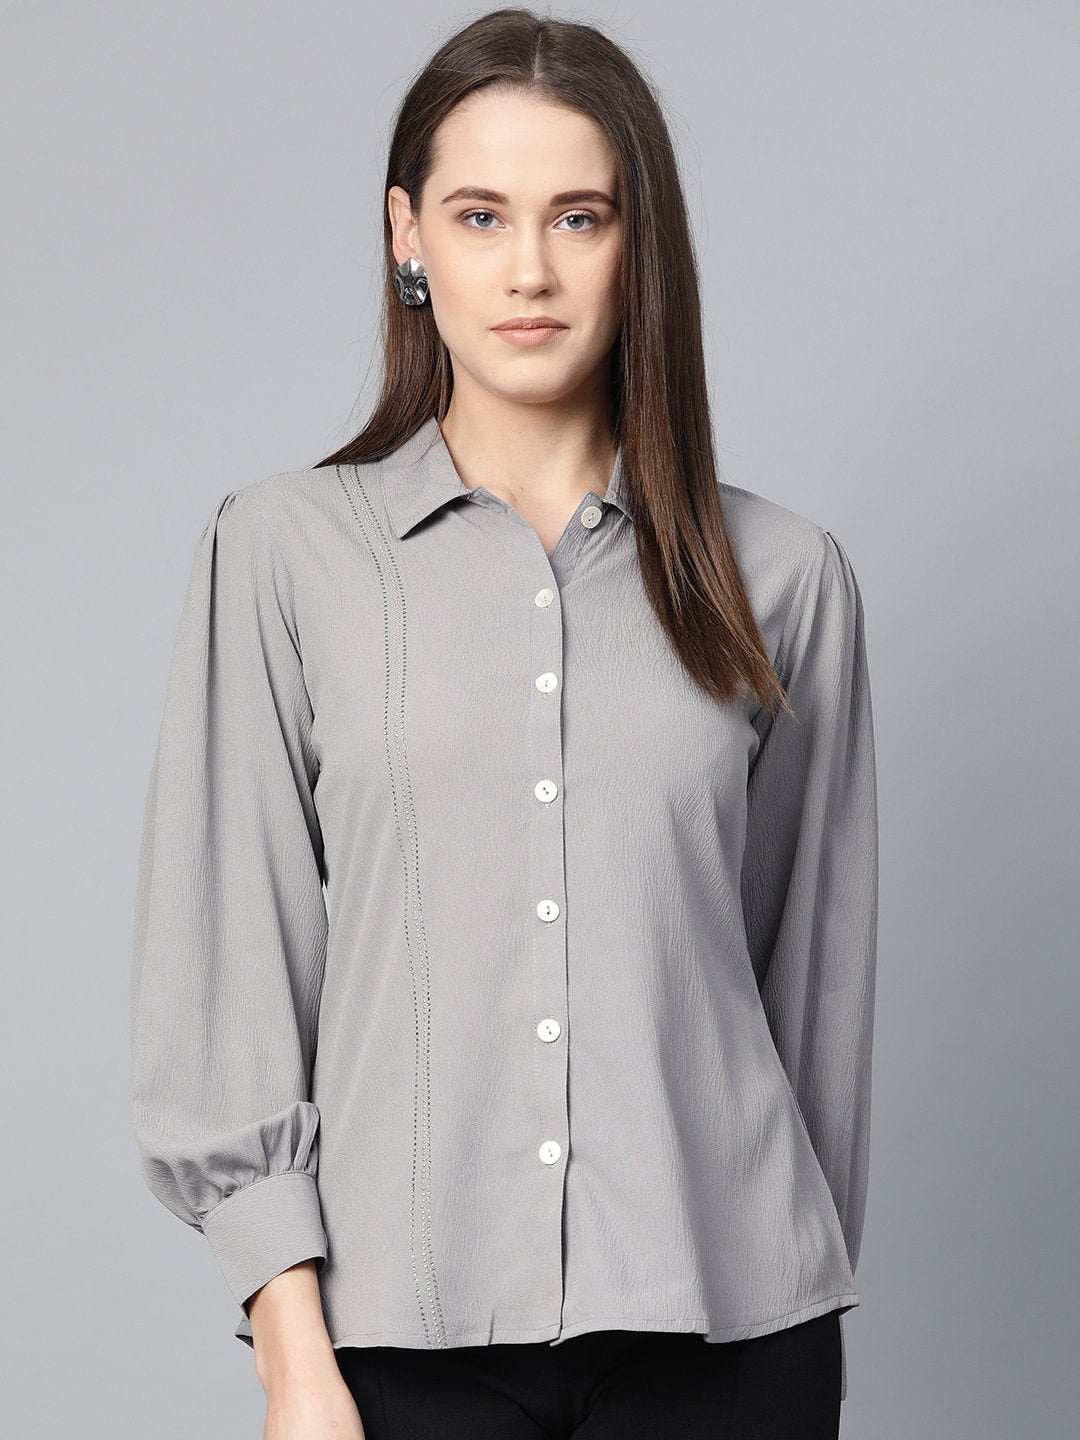 Women's Grey Regular Fit Crinkled Effect Casual Shirt - Jompers